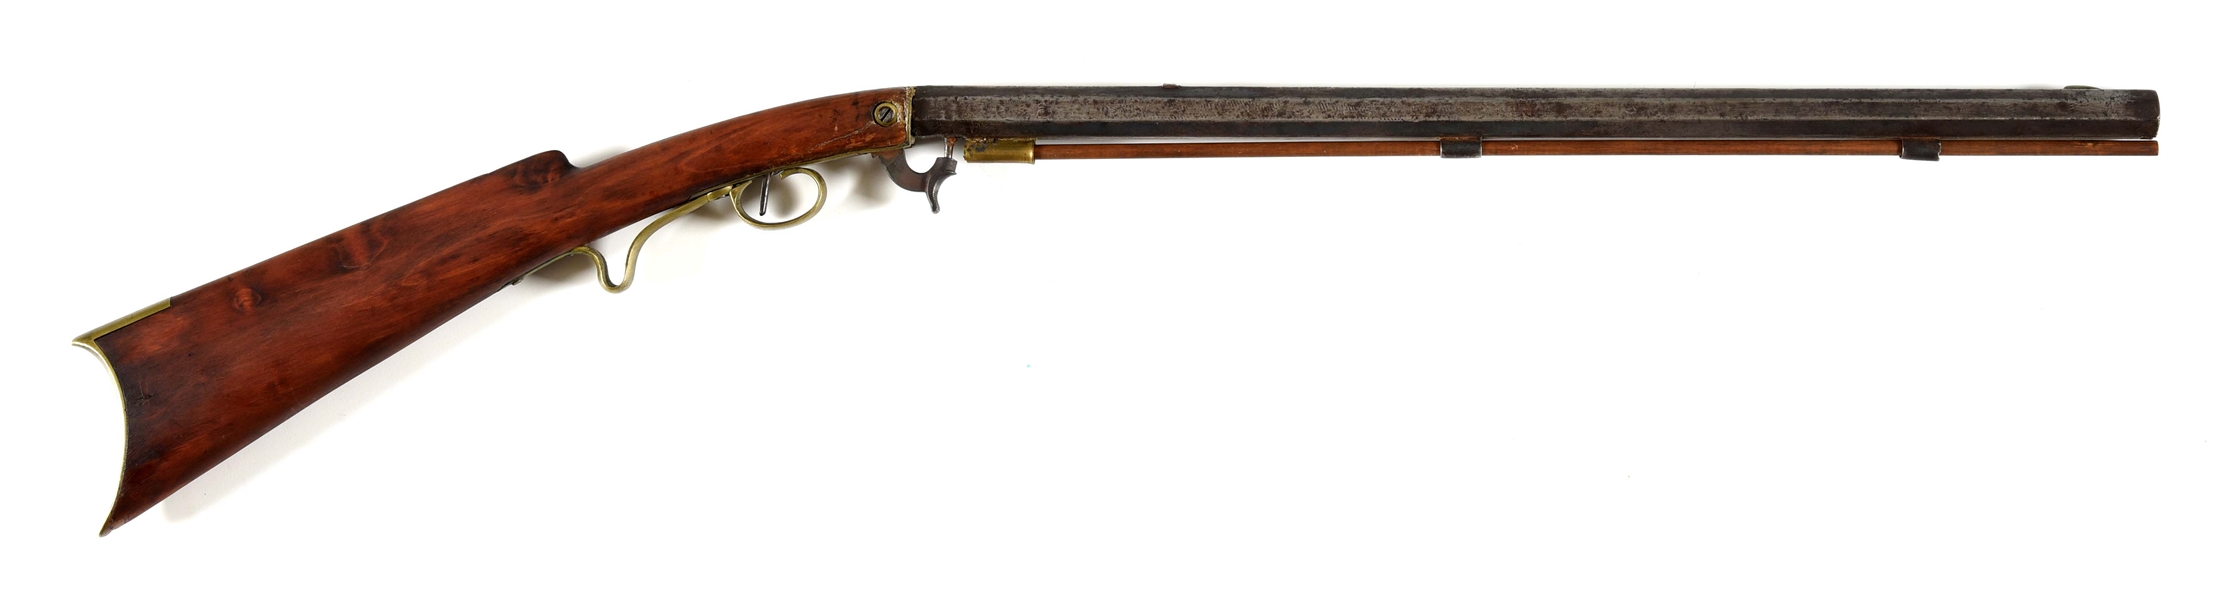 (A) VERMONT UNDERHAMMER PERCUSSION RIFLE BY KENDALL